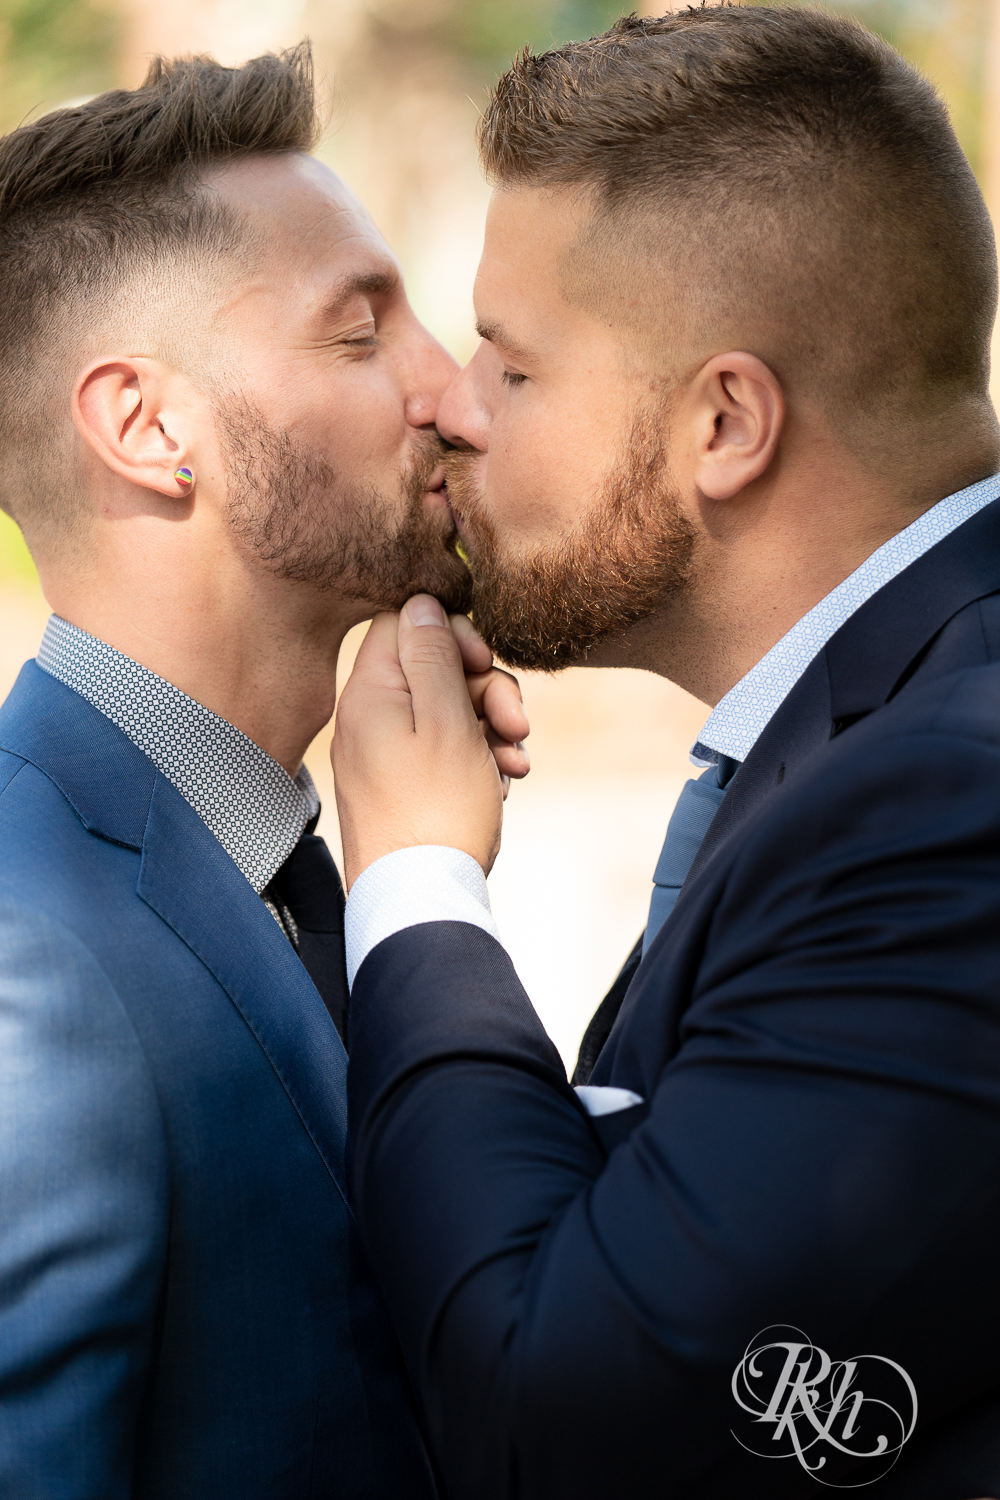 Gay grooms in blue suits kissing on sunny wedding day at Nicollet Island in Minneapolis, Minnesota.